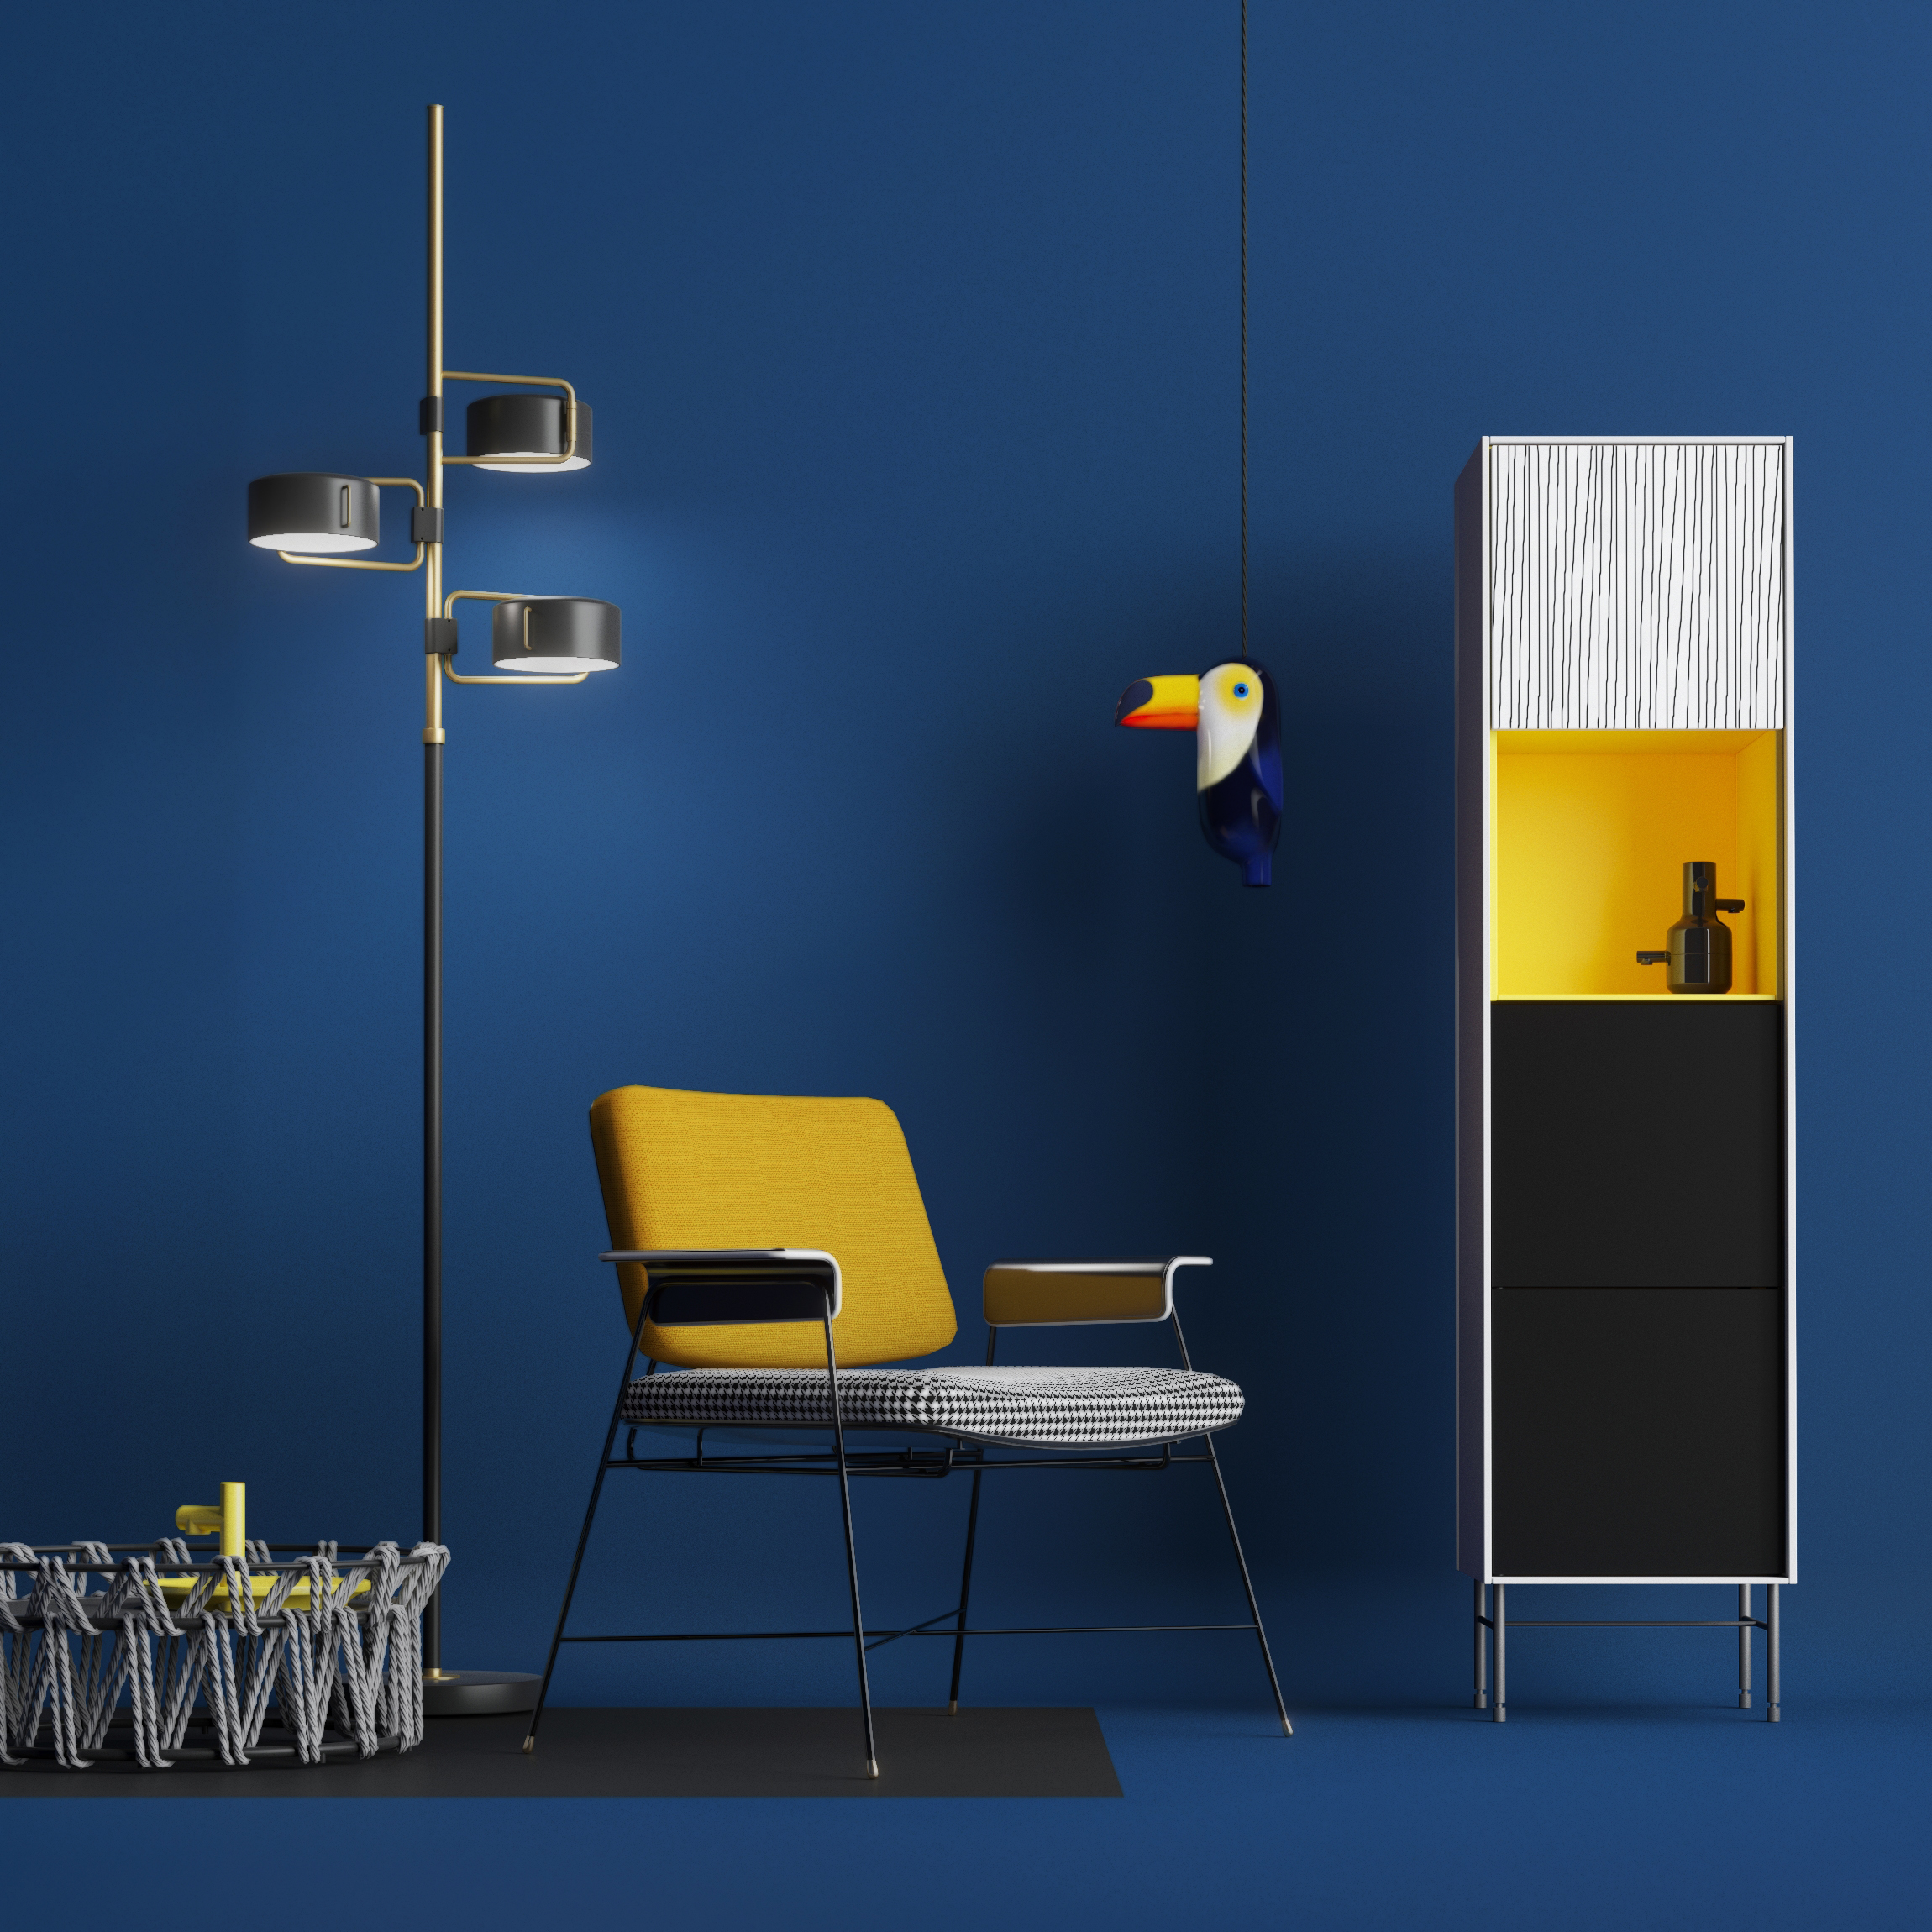 Striking blue, yellow and black color palette makes furniture photography stand out